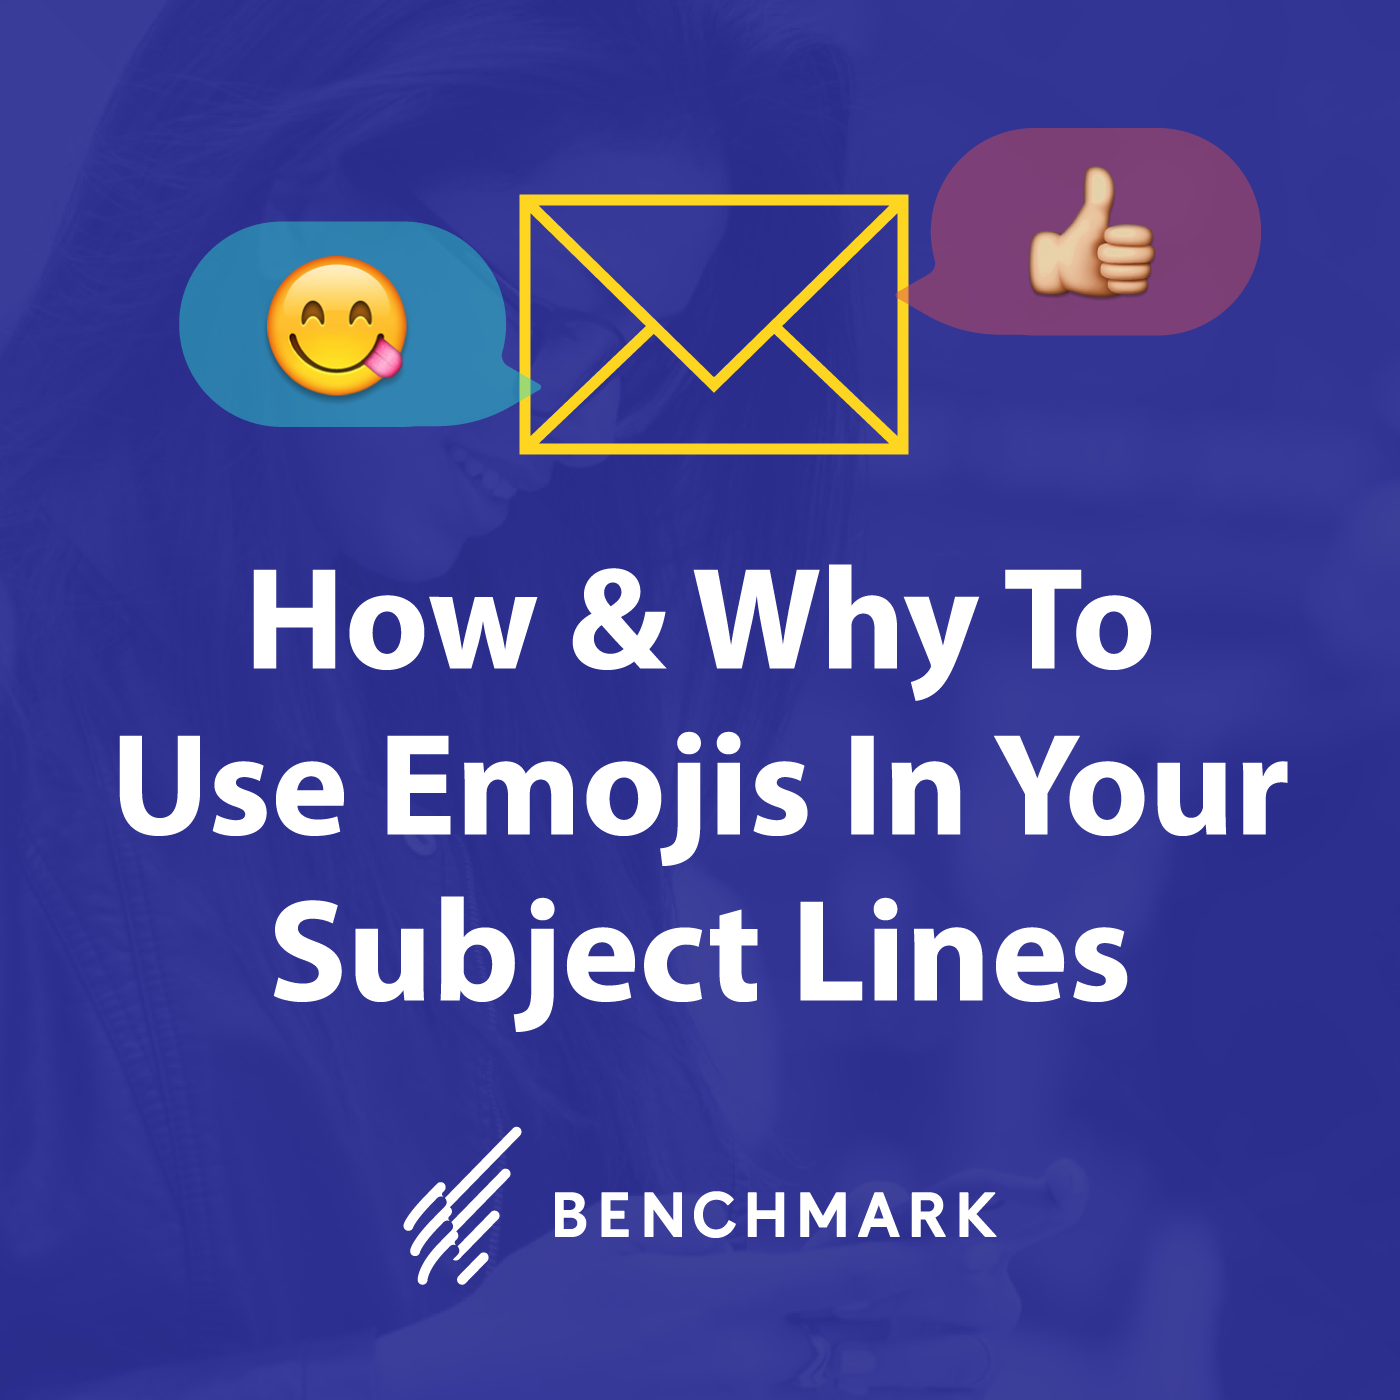 How & Why To Use Emojis In Your Subject Lines